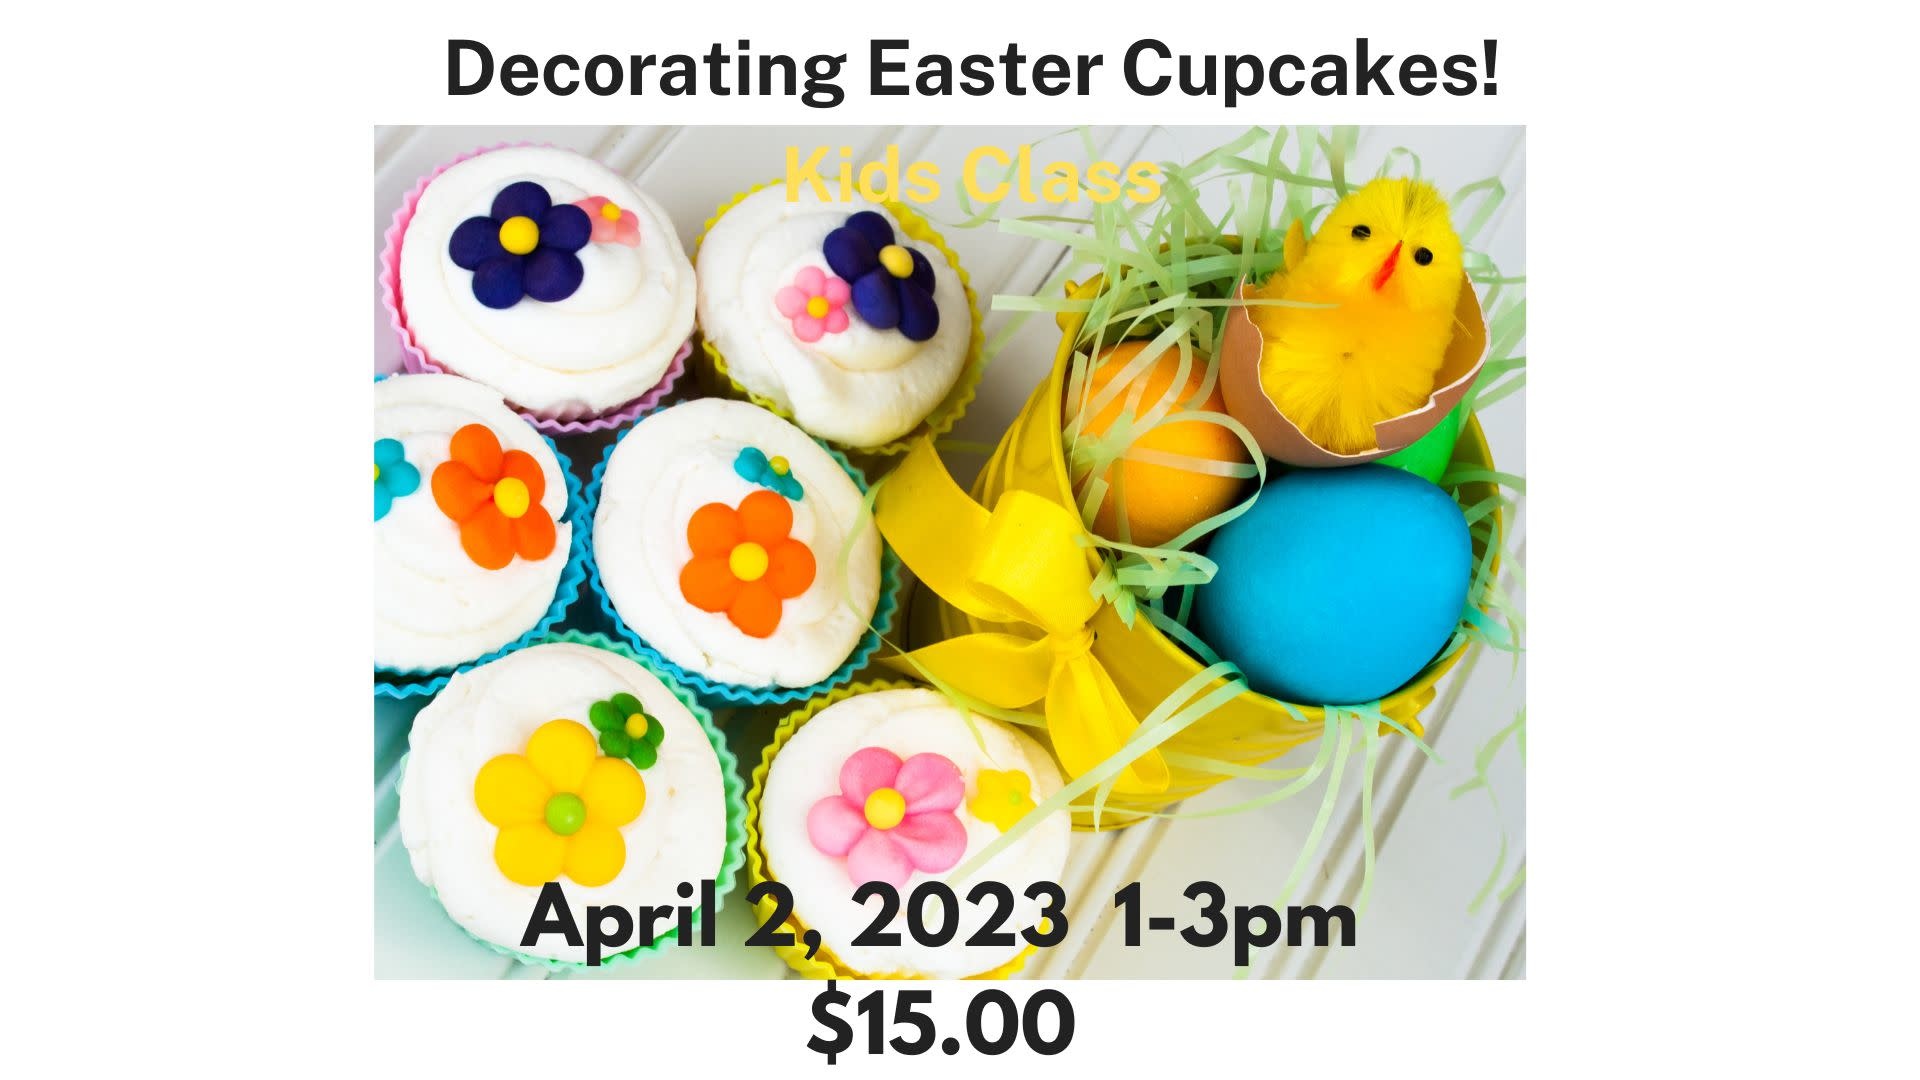 Kids Class Decorating Easter Cupcakes 4/2/2023